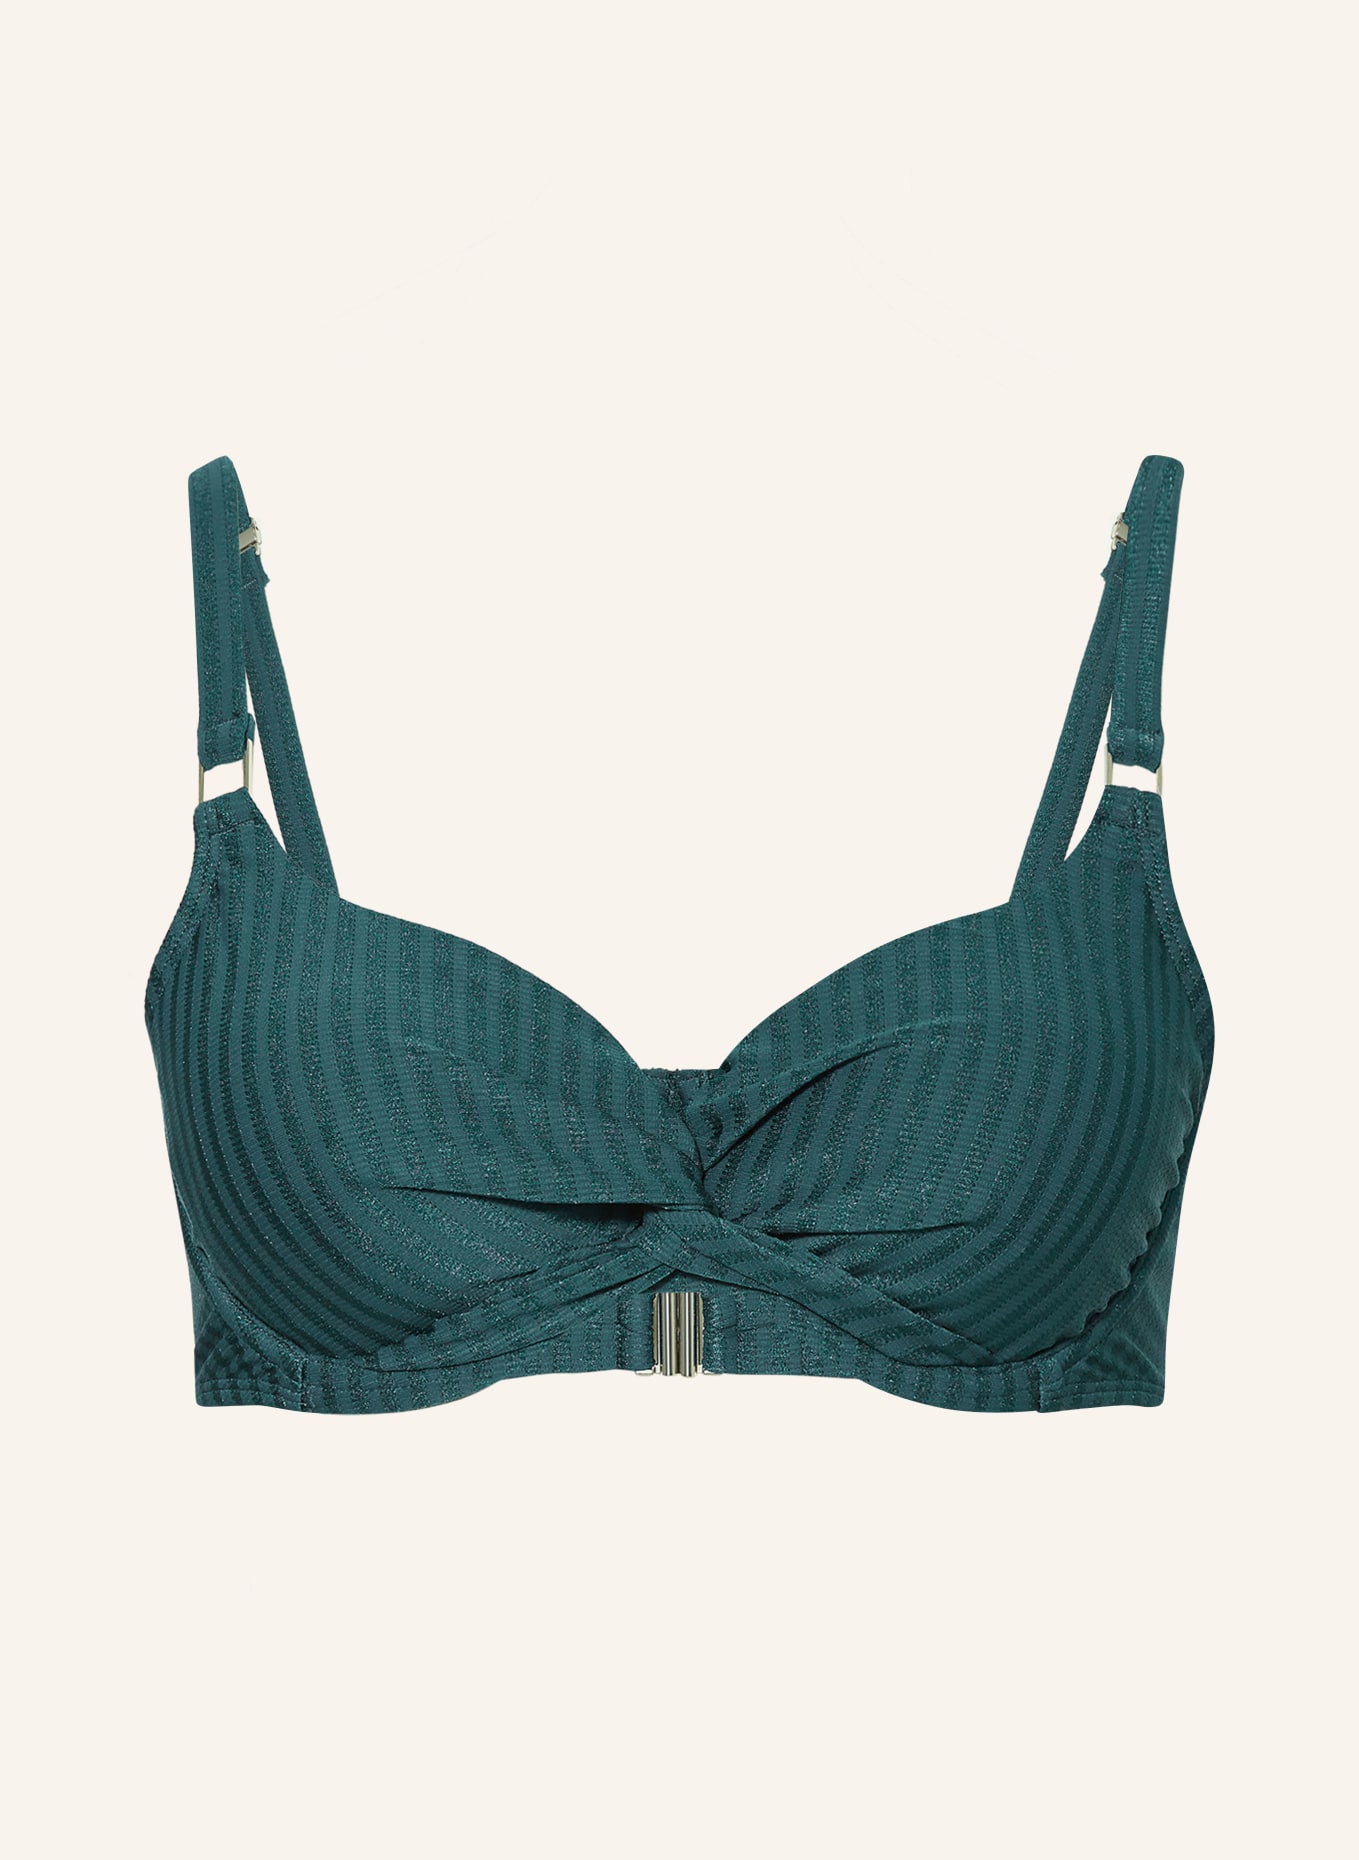 BEACHLIFE Underwired bikini top REFLECTING POND, Color: TEAL (Image 1)